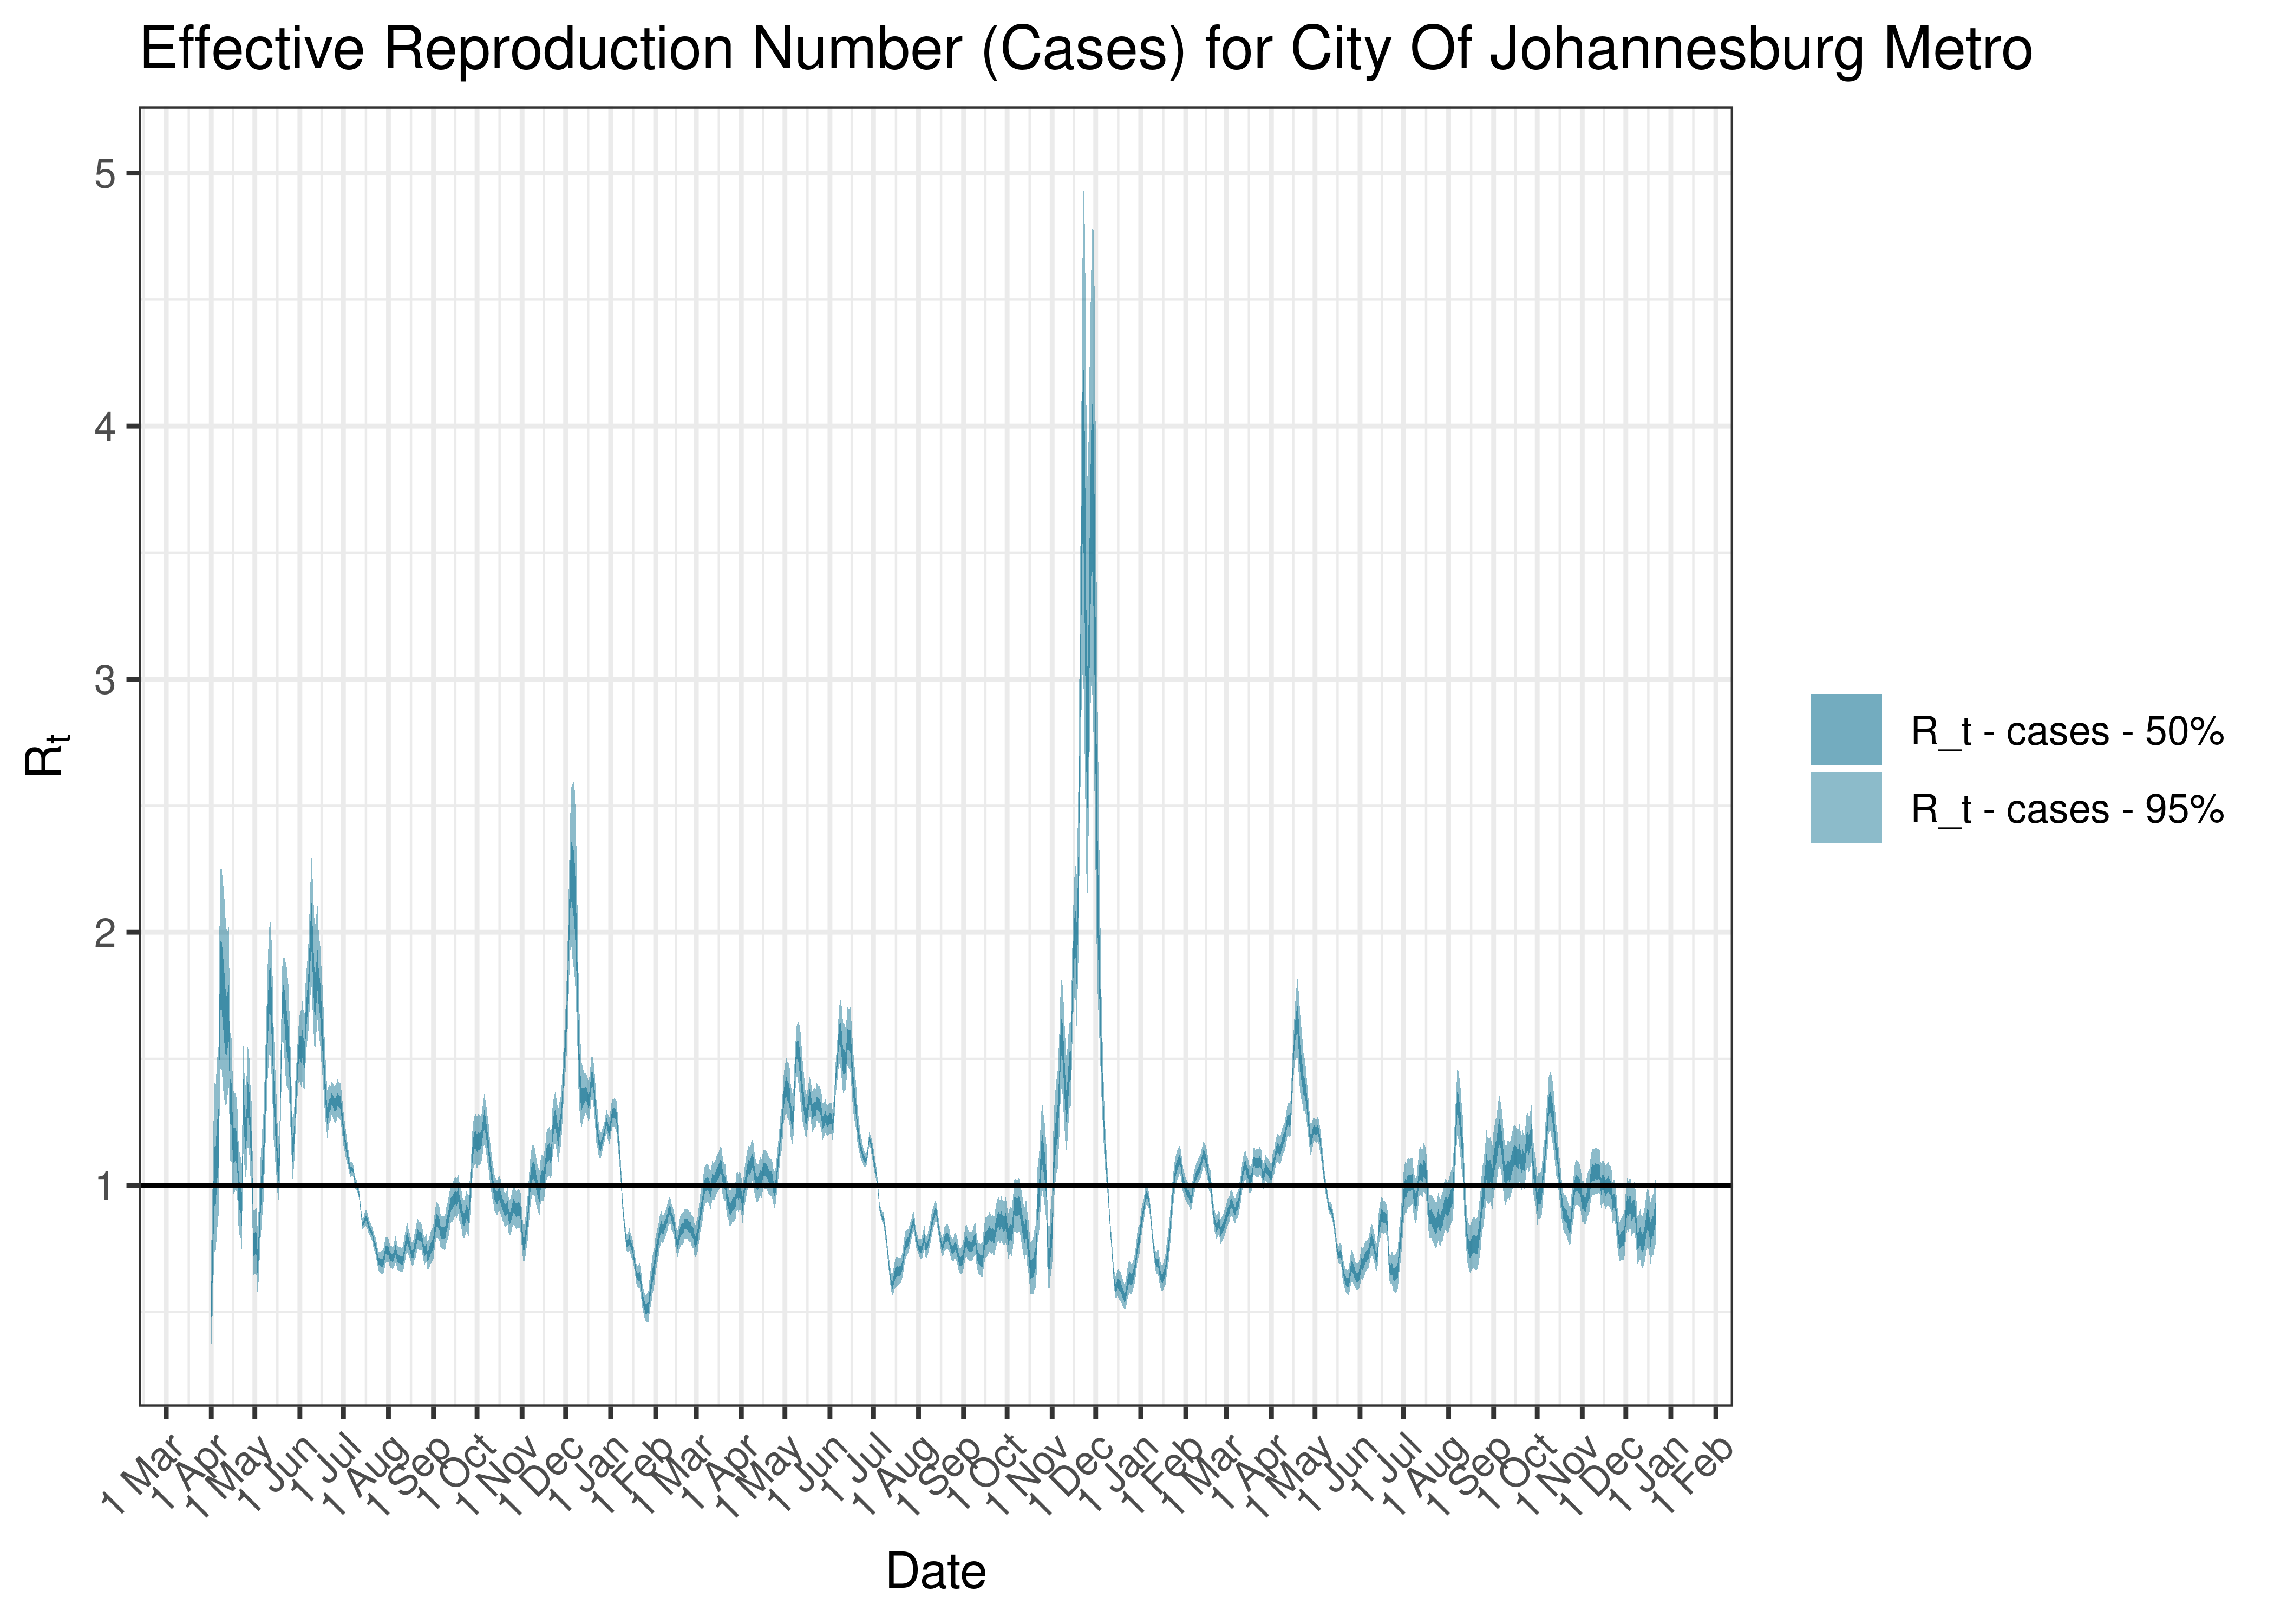 Estimated Effective Reproduction Number Based on Cases for City Of Johannesburg Metro since 1 April 2020